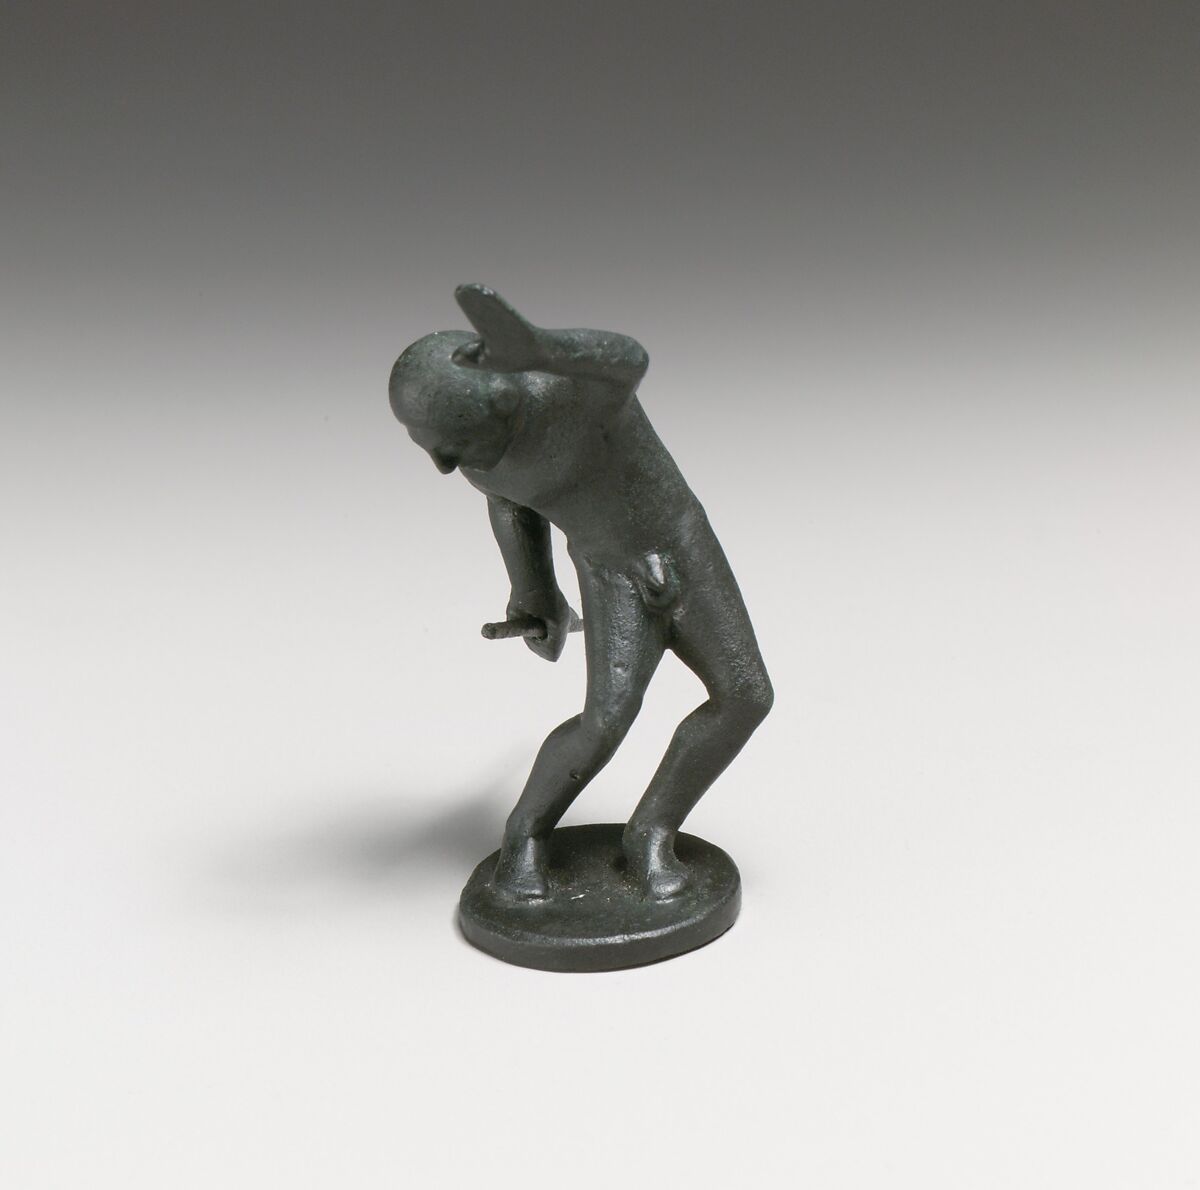 Statuette of an athlete, Bronze, Greek or Etruscan 